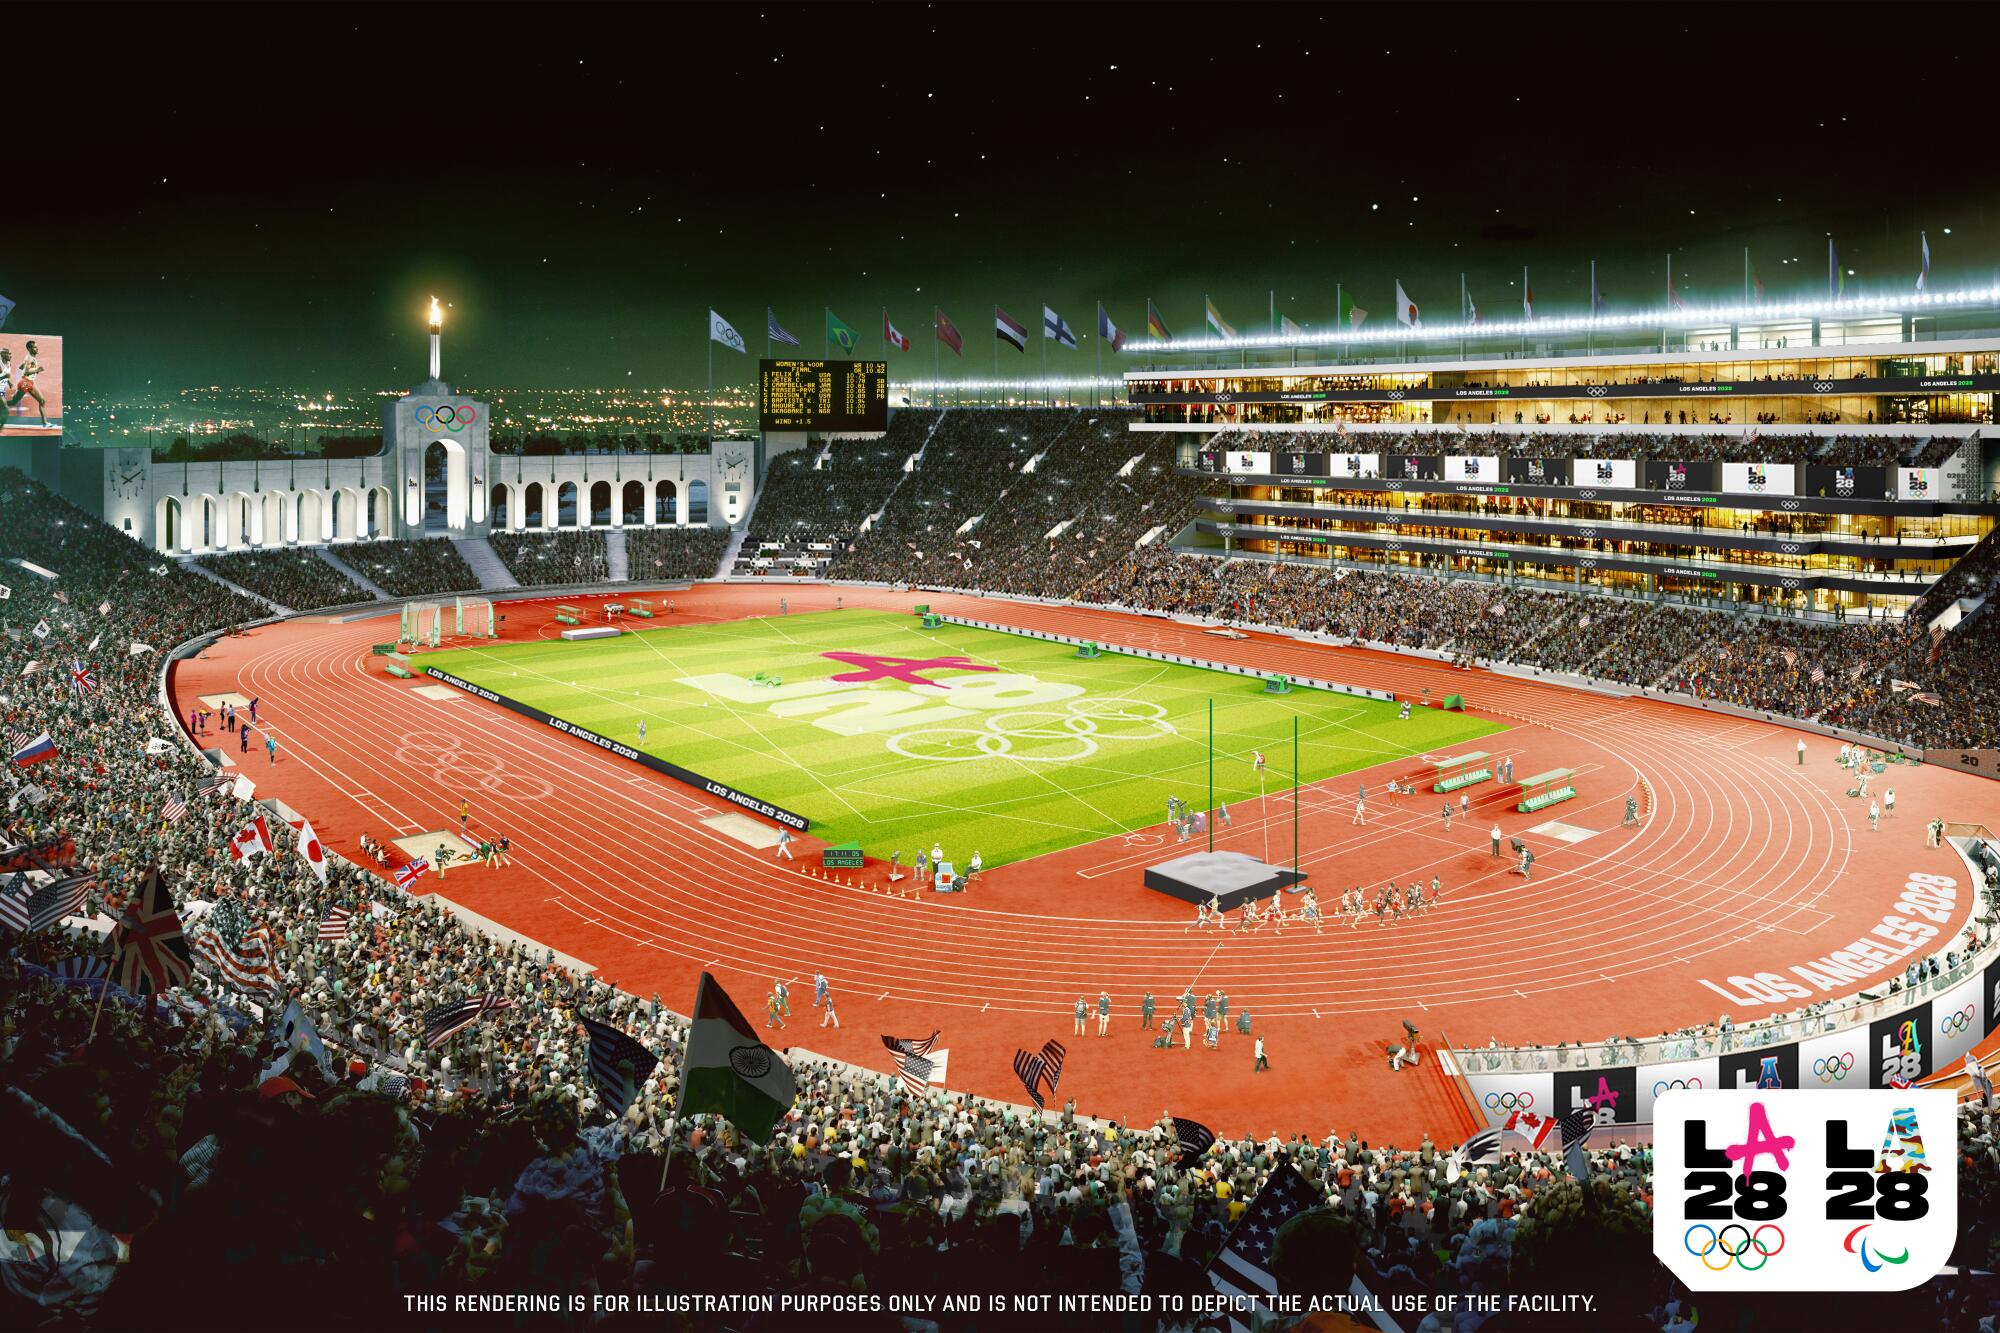 An artist's rendering depicts a crowded Los Angeles Memorial Coliseum lighted at night